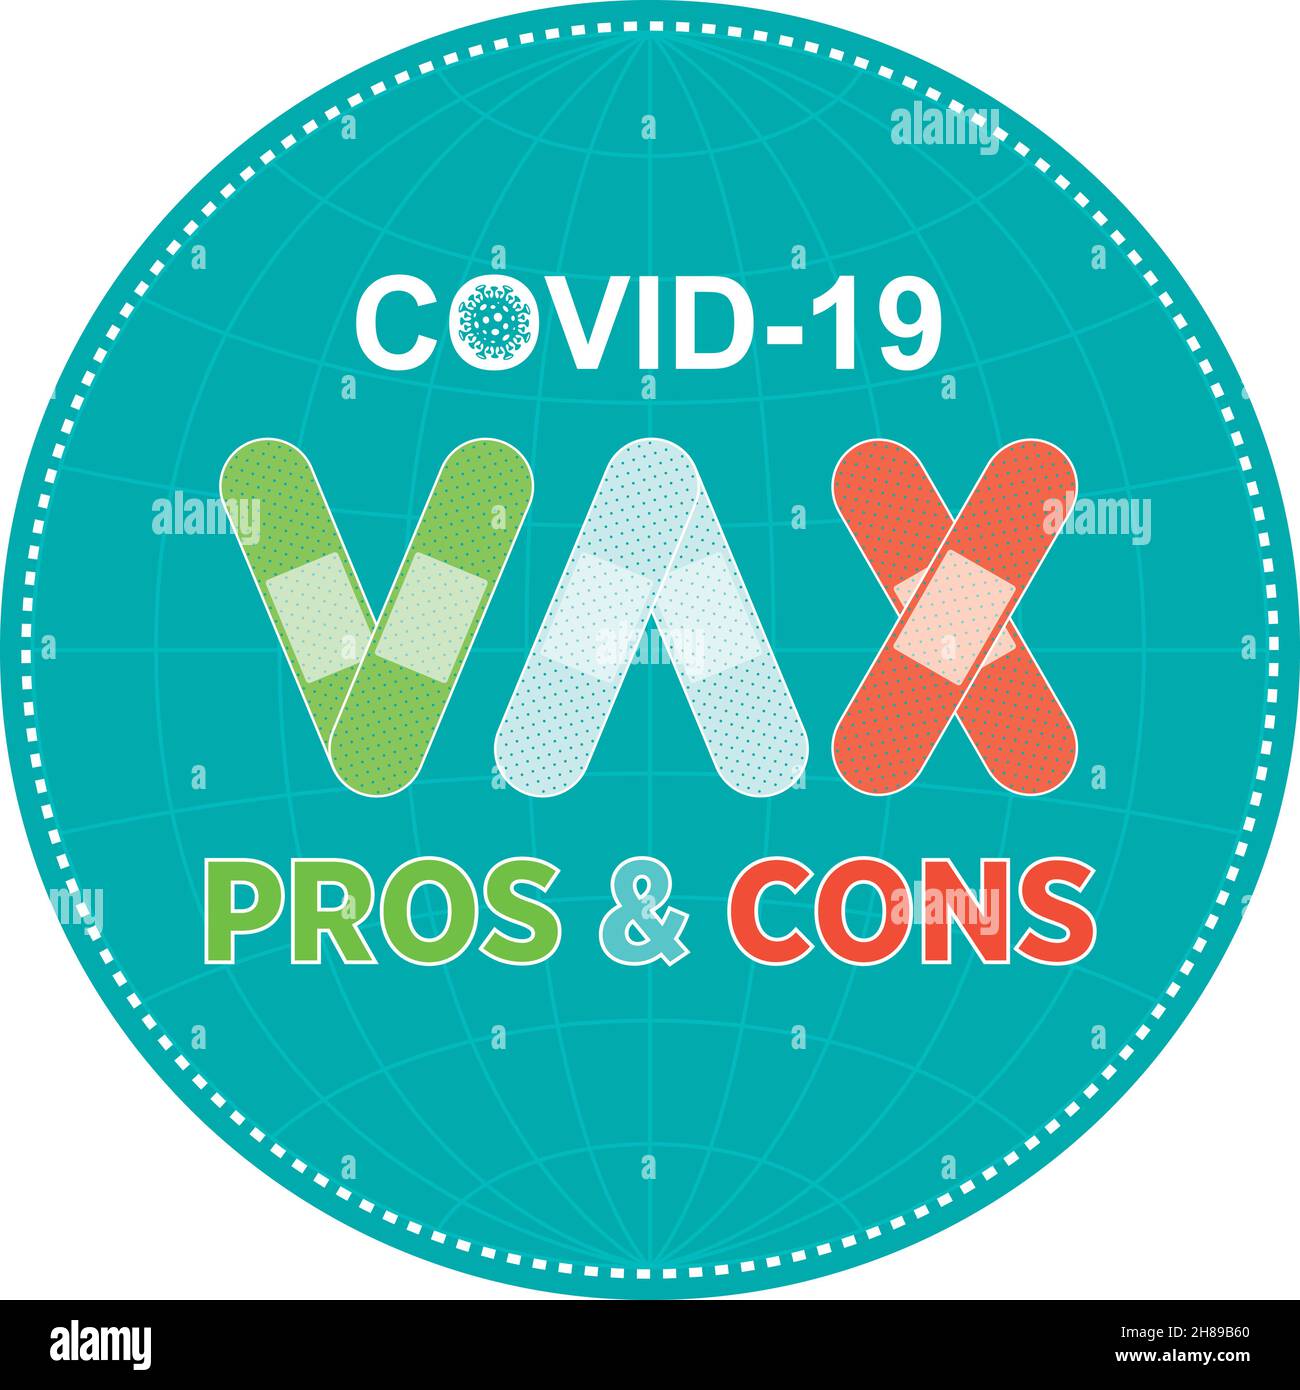 COVID19 Vaccination Pros and Cons for help reduce the risk of catching coronavirus Covid-19. Vax Vector sign. Stock Vector